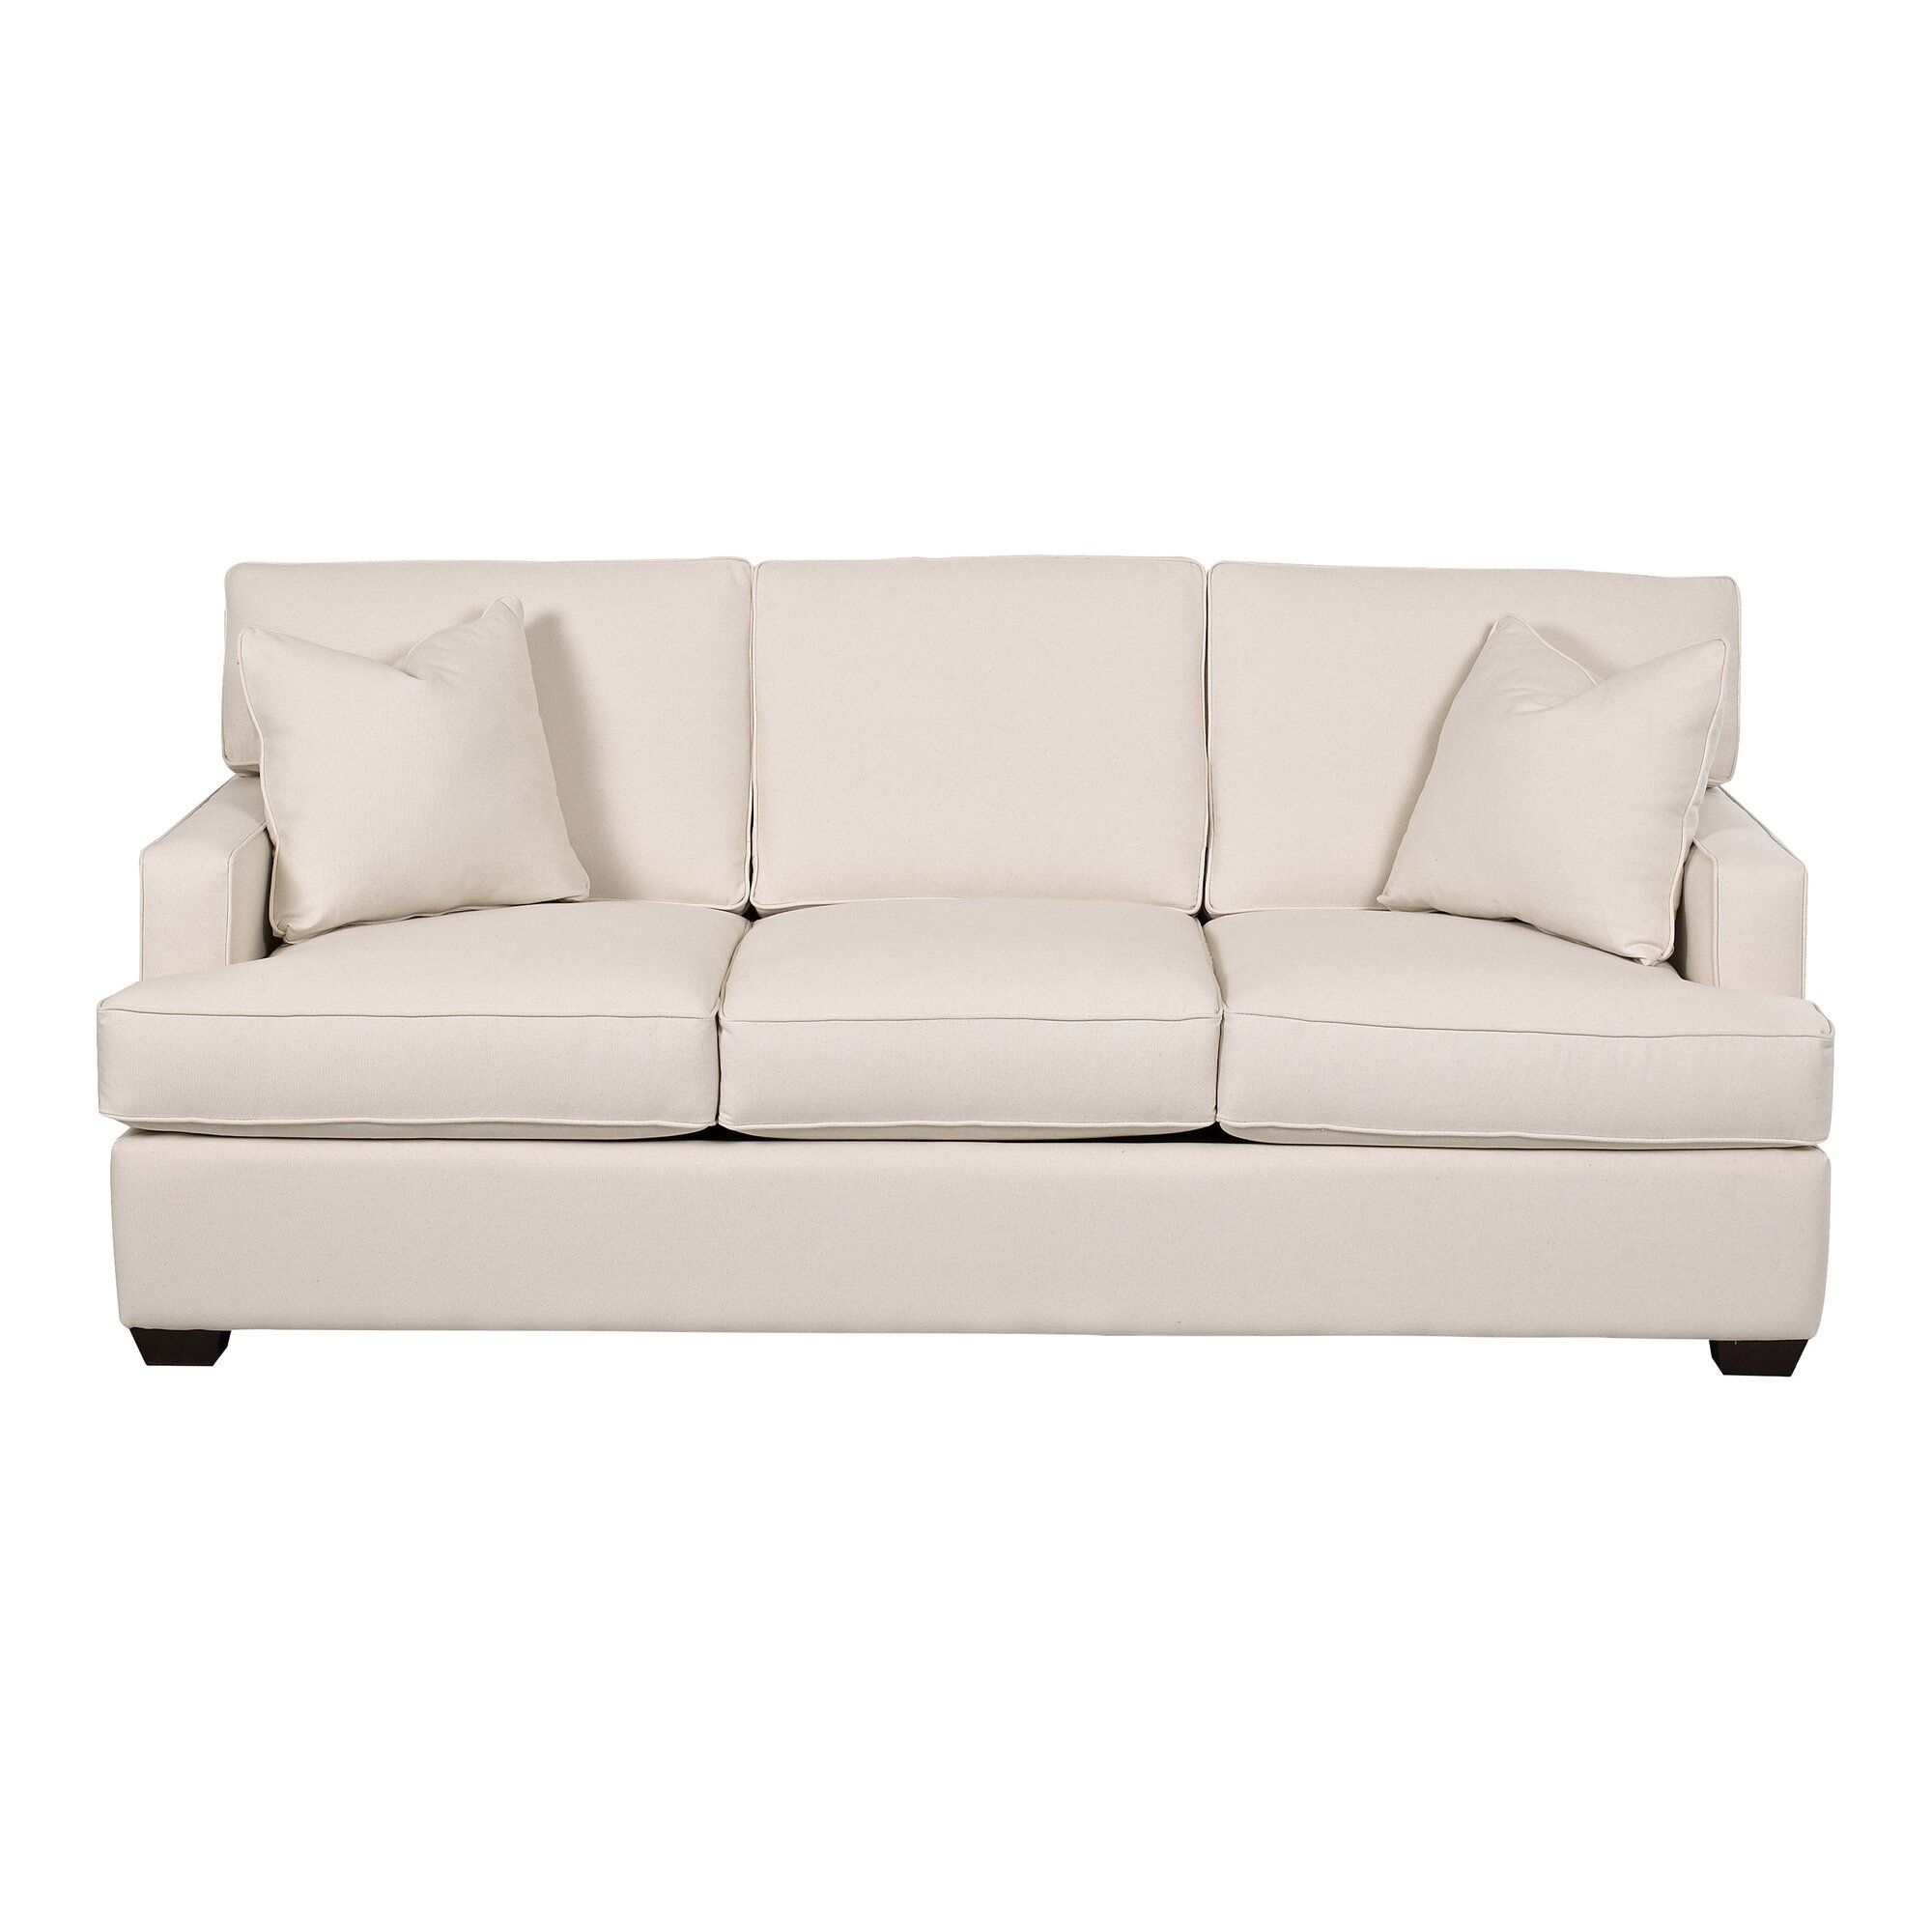 Avery Sofa & Reviews | Allmodern Pertaining To Camila Poly Blend Sectional Sofas Off White (View 2 of 15)